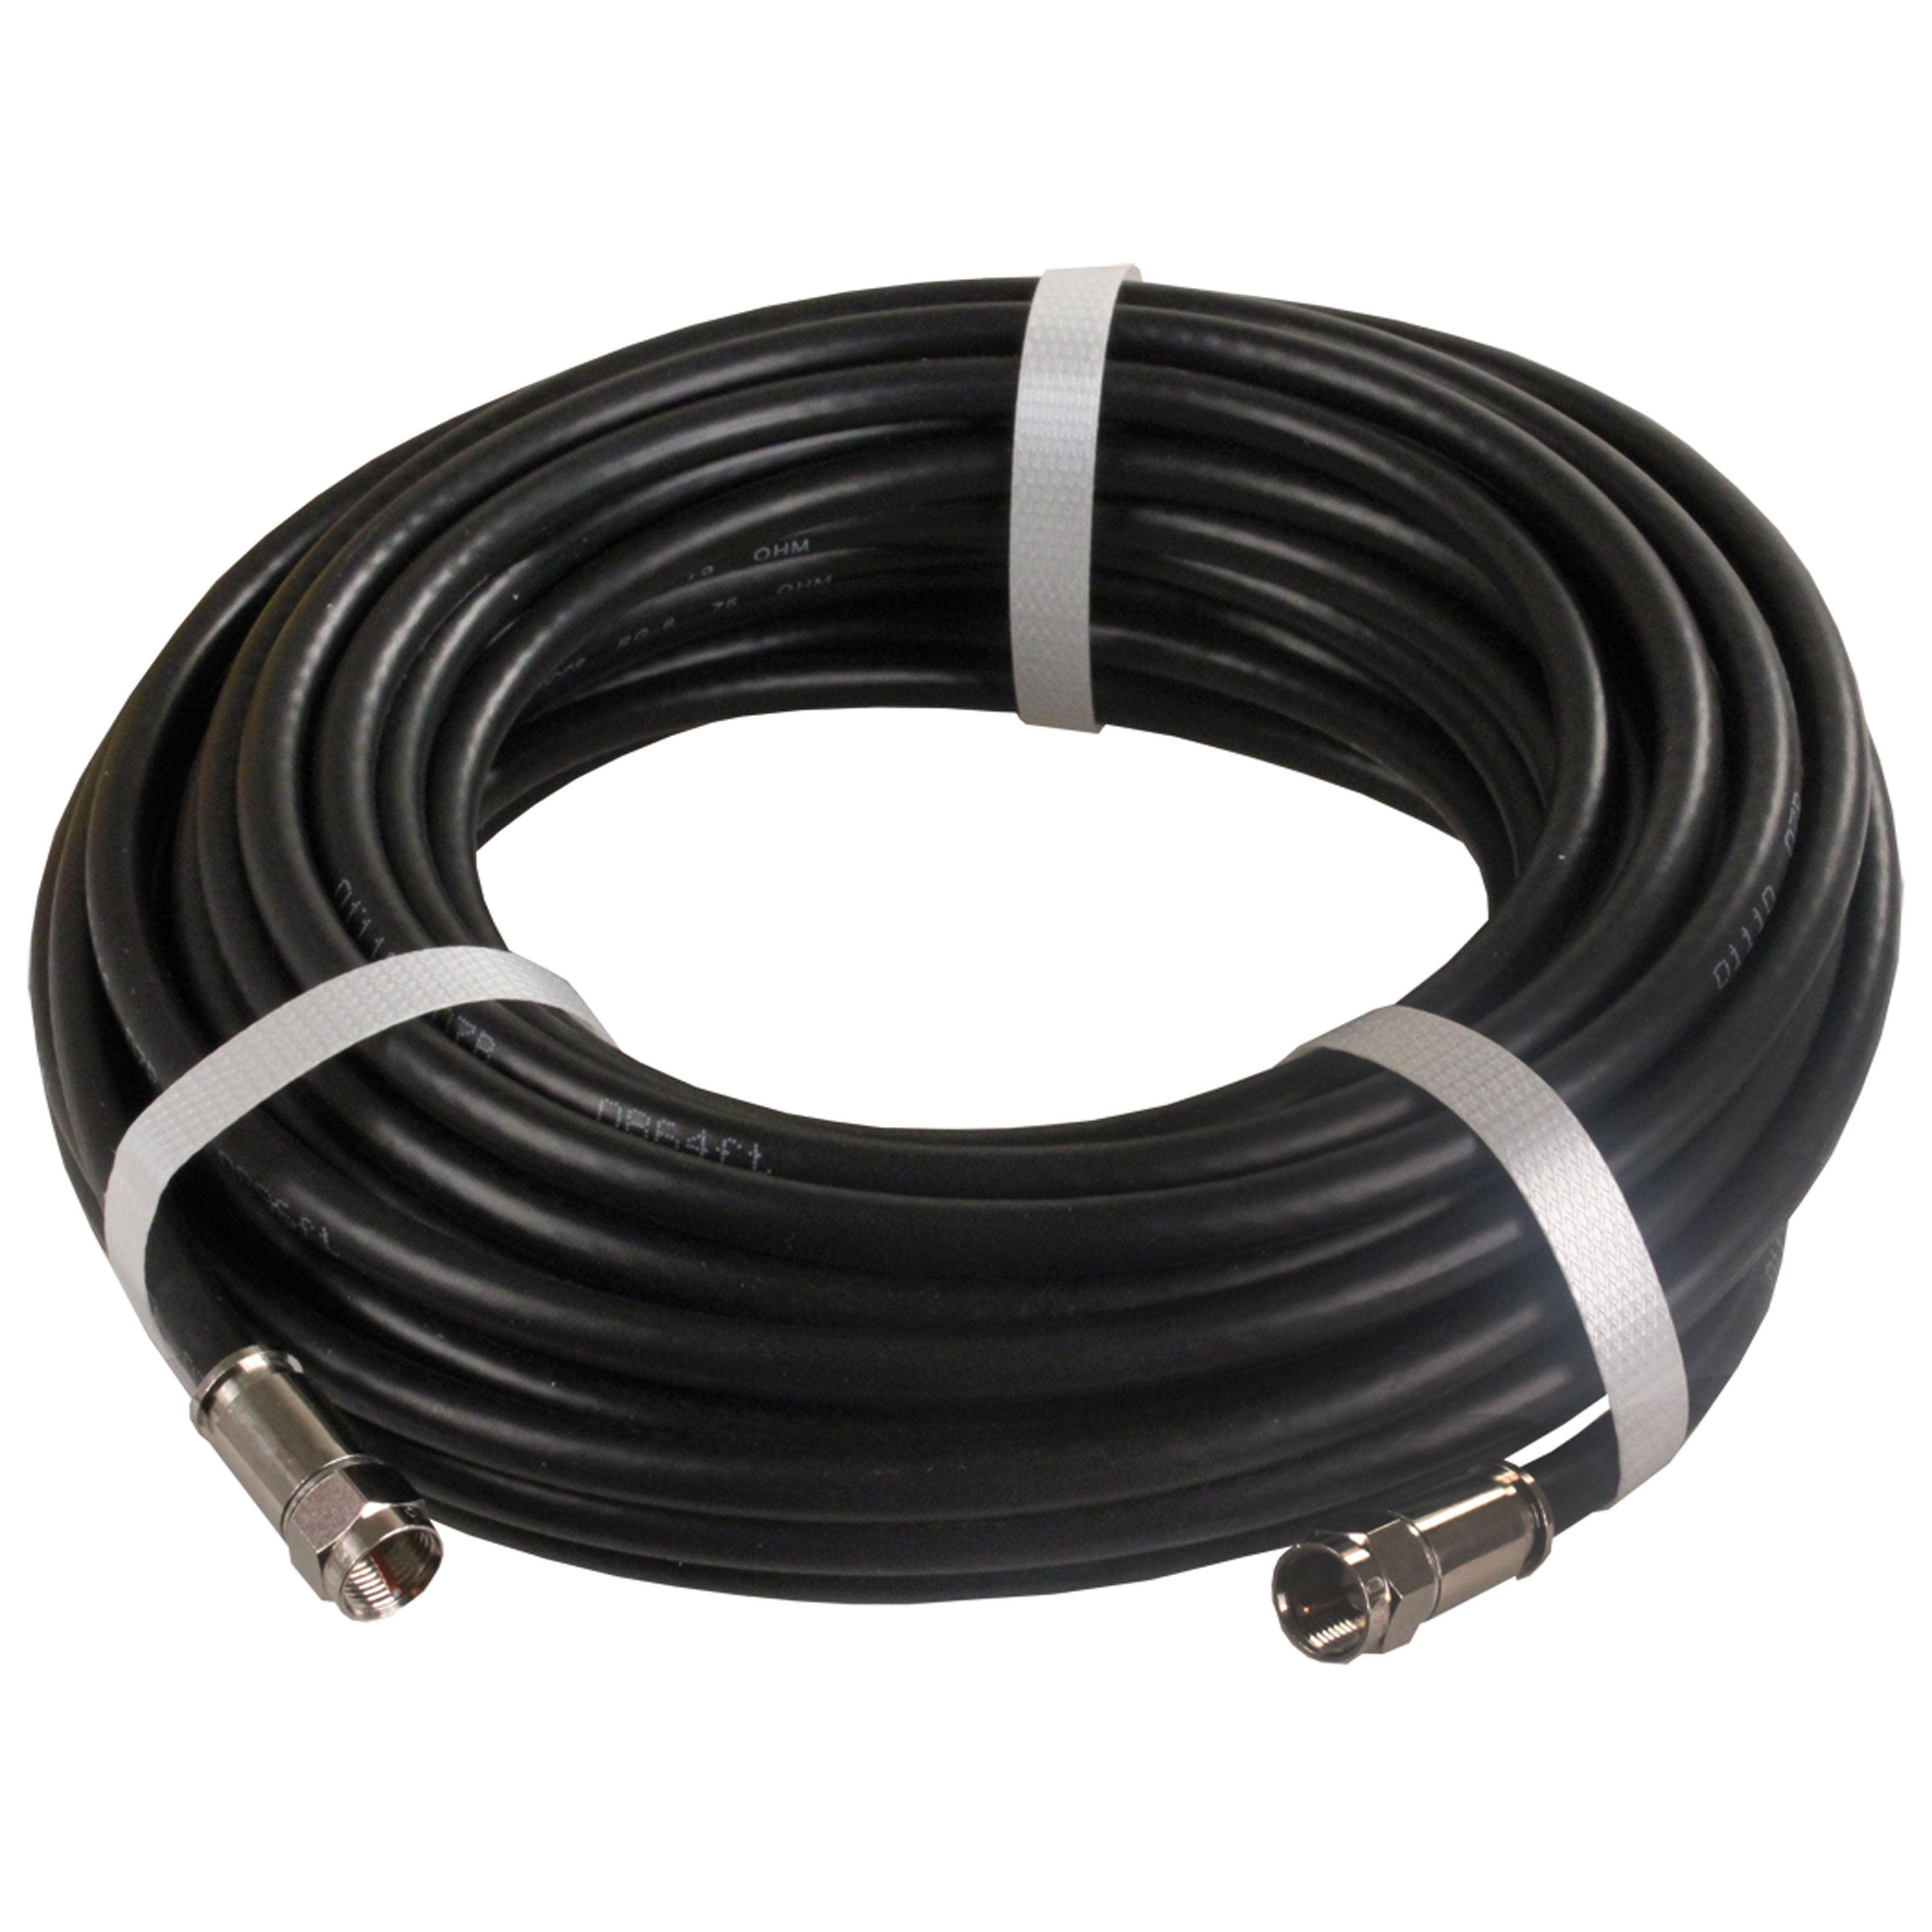 JR Products 47985 RG6 Exterior HD/Satellite Cable - 50'